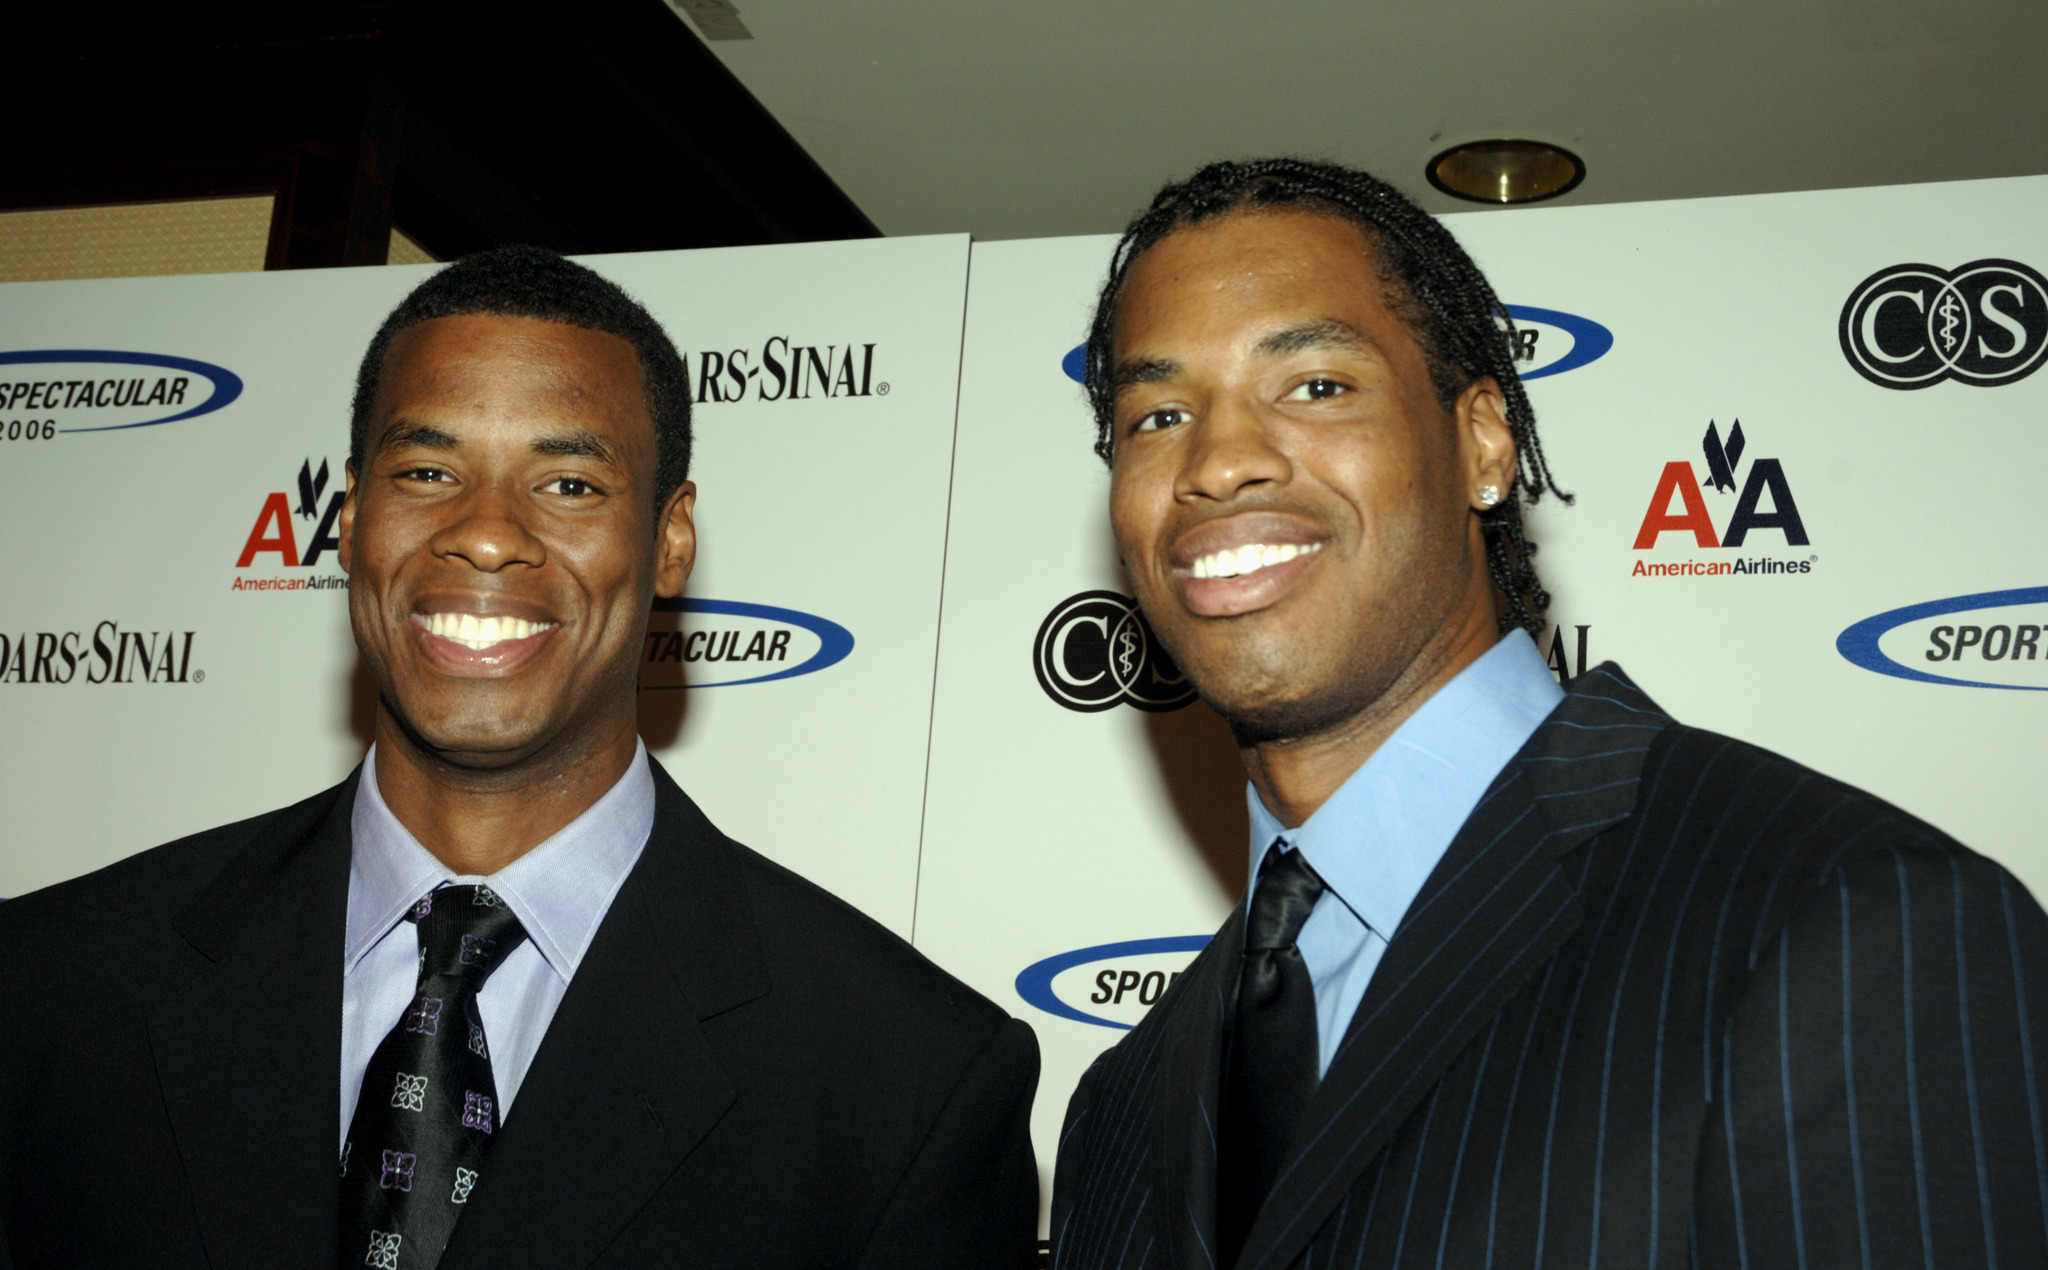 Jarron Collins and Jason Collins arrive at the Cedars-Sinai Medical Center's 21st Annuel Sports Spectacular at the Hyatt Regency Century Plaza Hotel in Century City, CA.